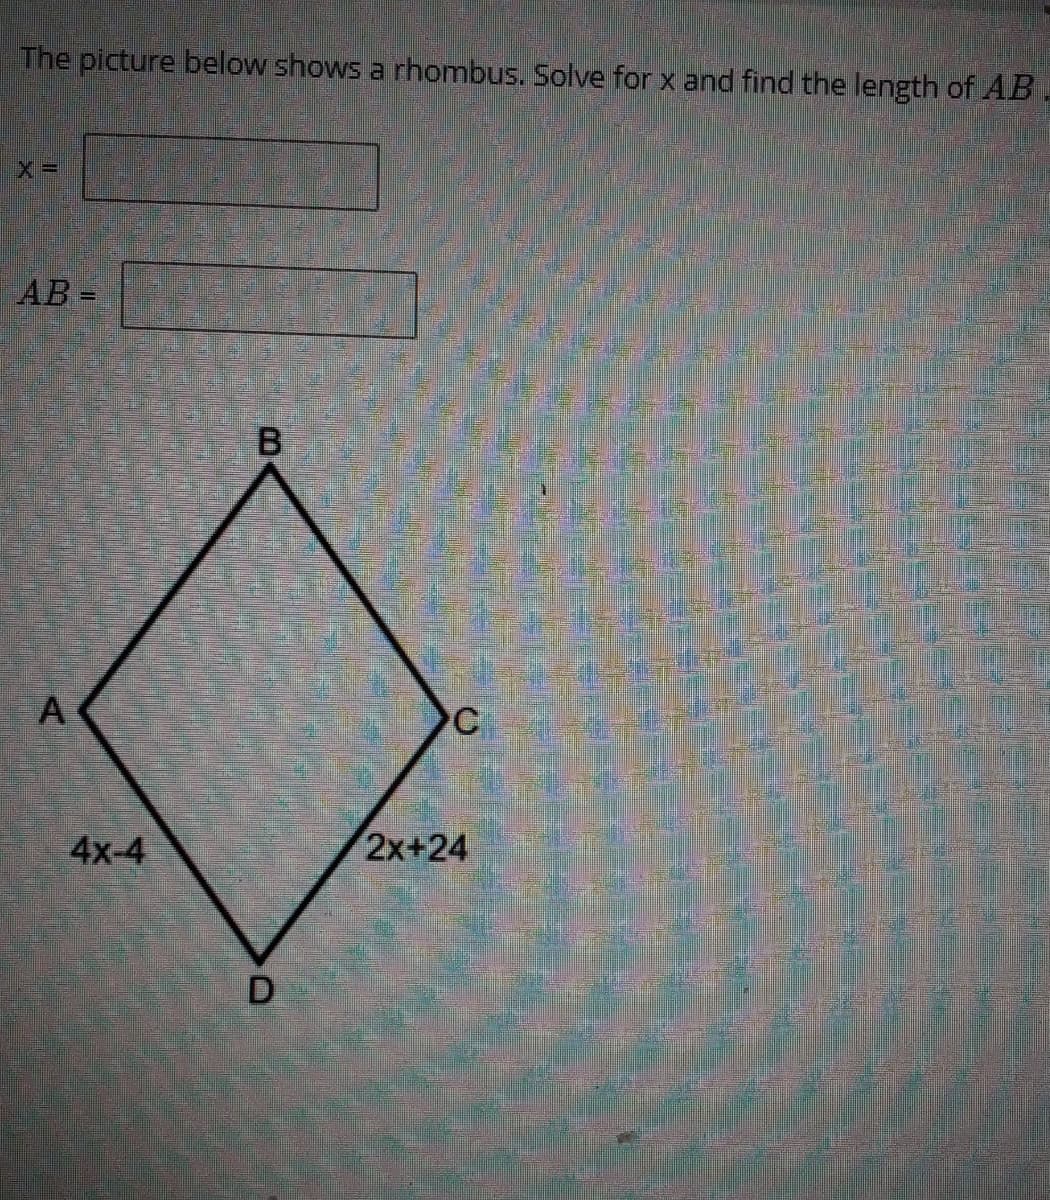 The picture below shows a rhombus. Solve for x and find the length of AB
AB =
C
4x-4
2x+24
A.
